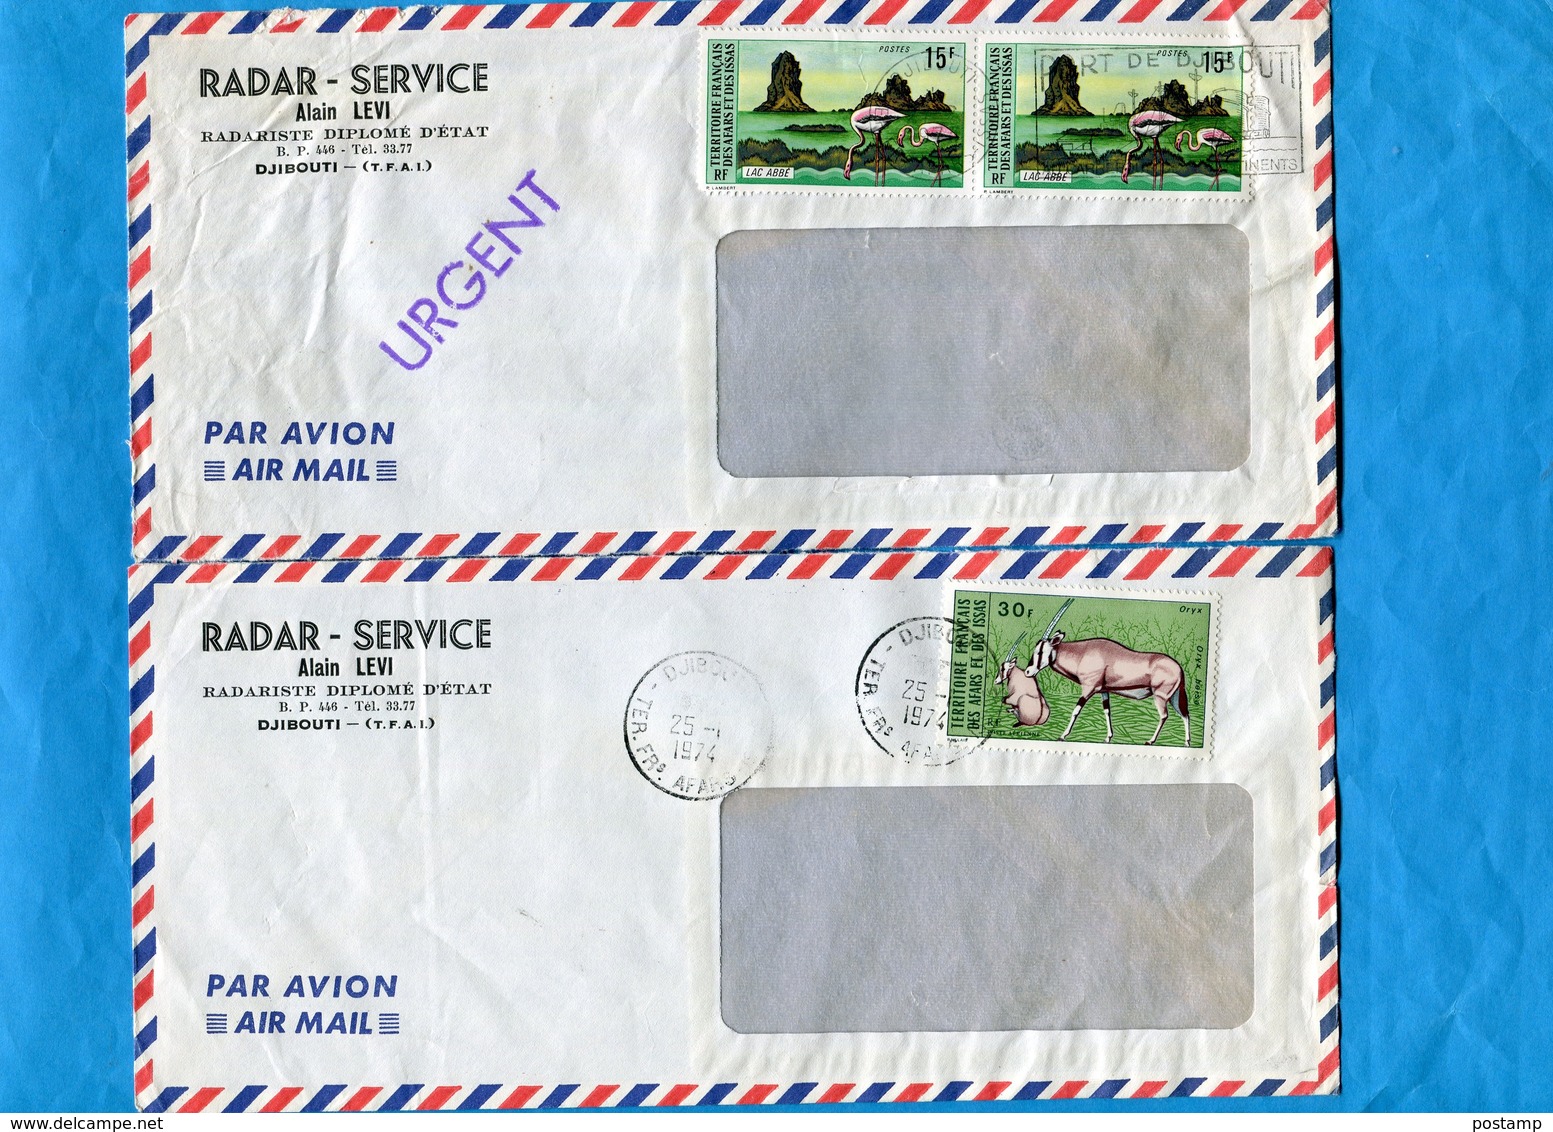 MARCOPHILIE-2  LETTRES- AFARS ET ISSAS- Cad 1973-4 -stampsN°A 80-ORYX+385 Flamands Rose - Covers & Documents